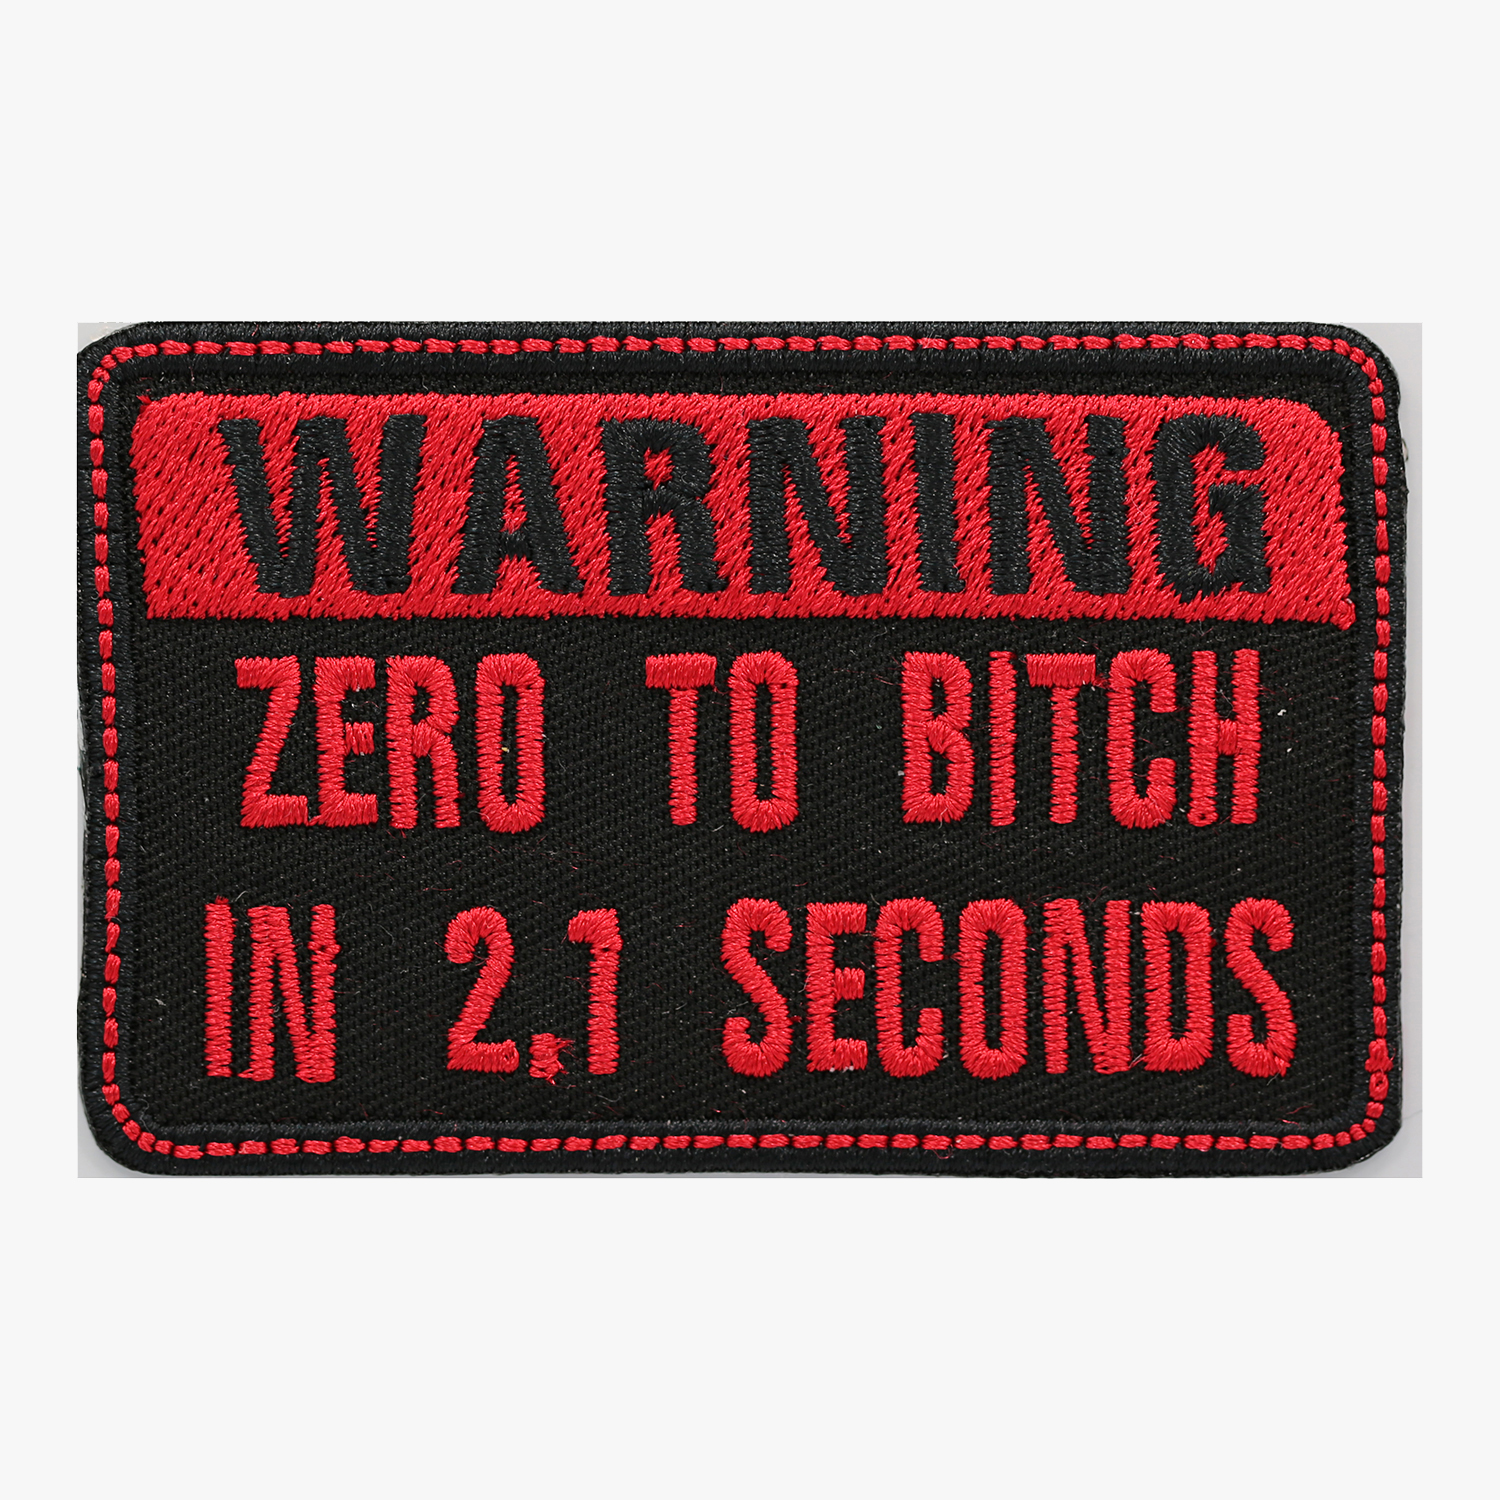 WARNING ZERO TO BITCH Embroidered Women Cut Patch